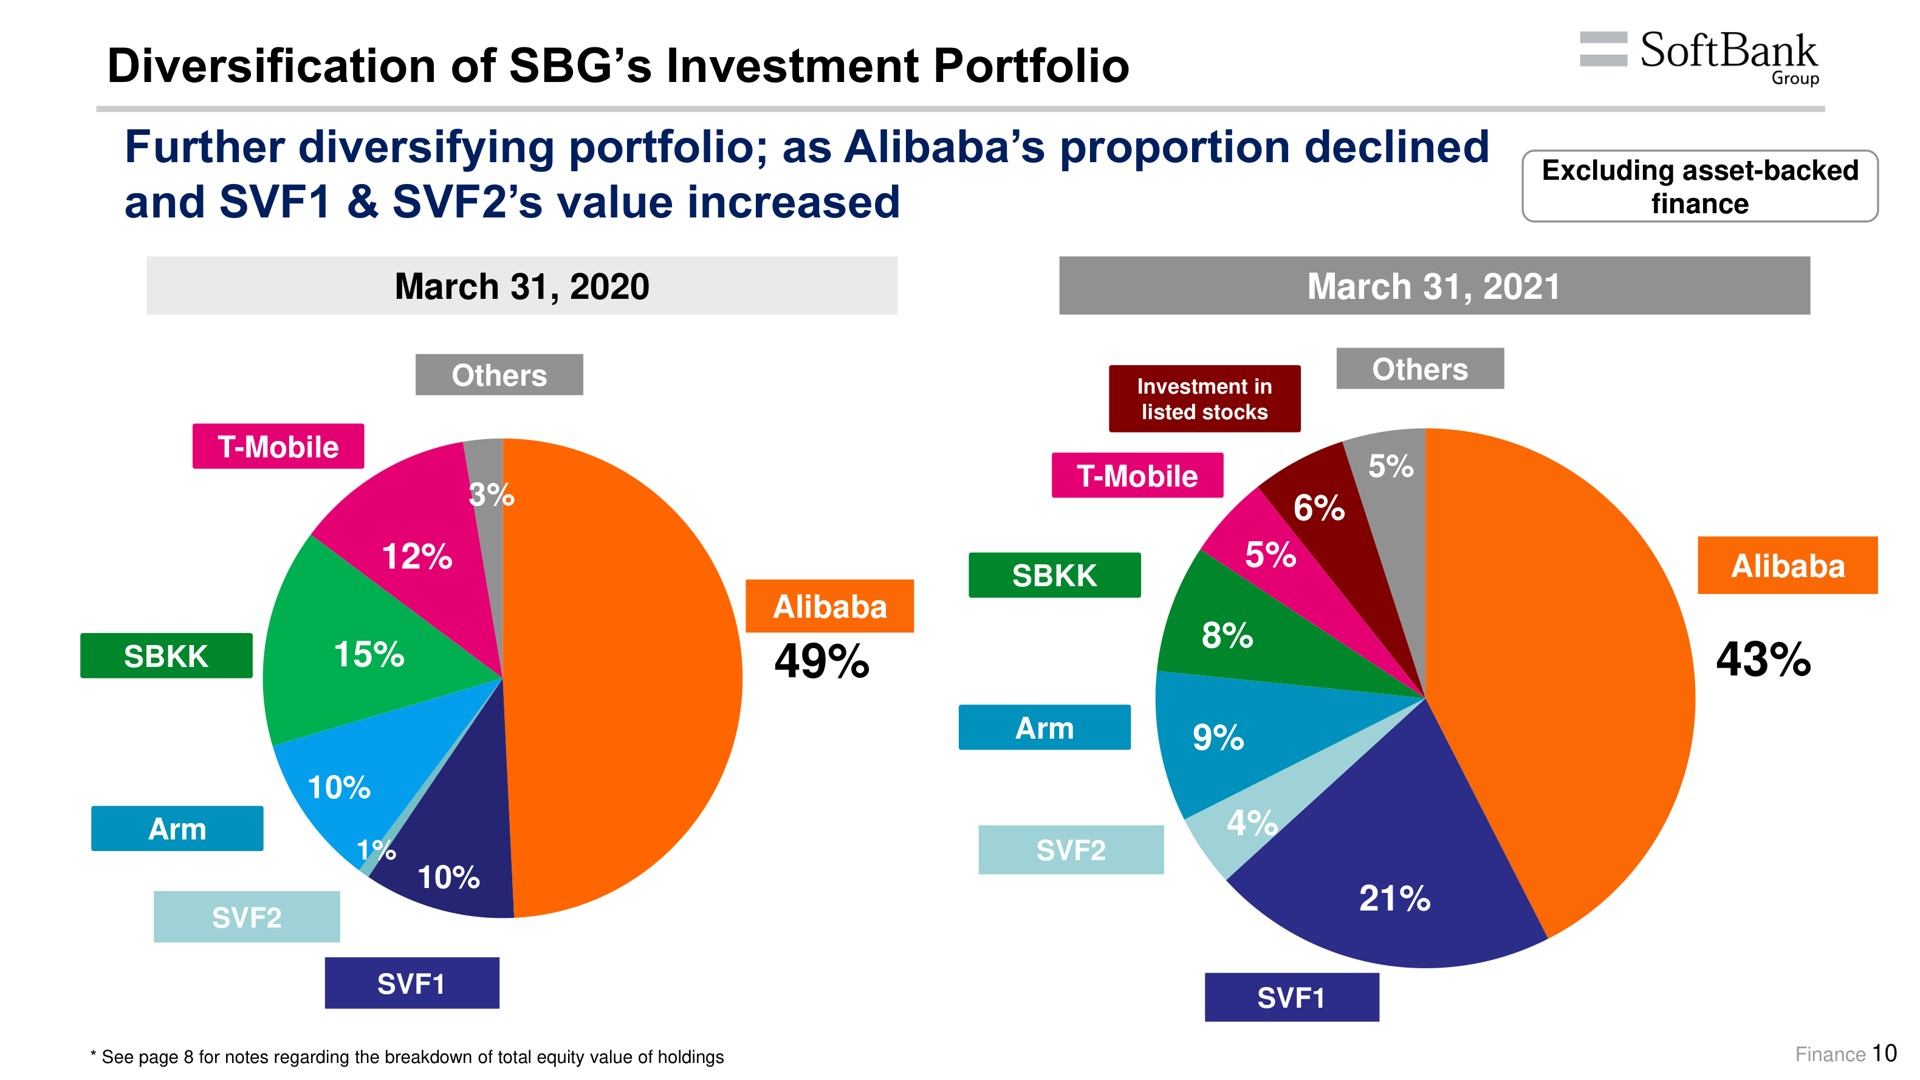 diversification of investment portfolio further diversifying portfolio as proportion declined and value increased march ding asset backed finance a | SoftBank